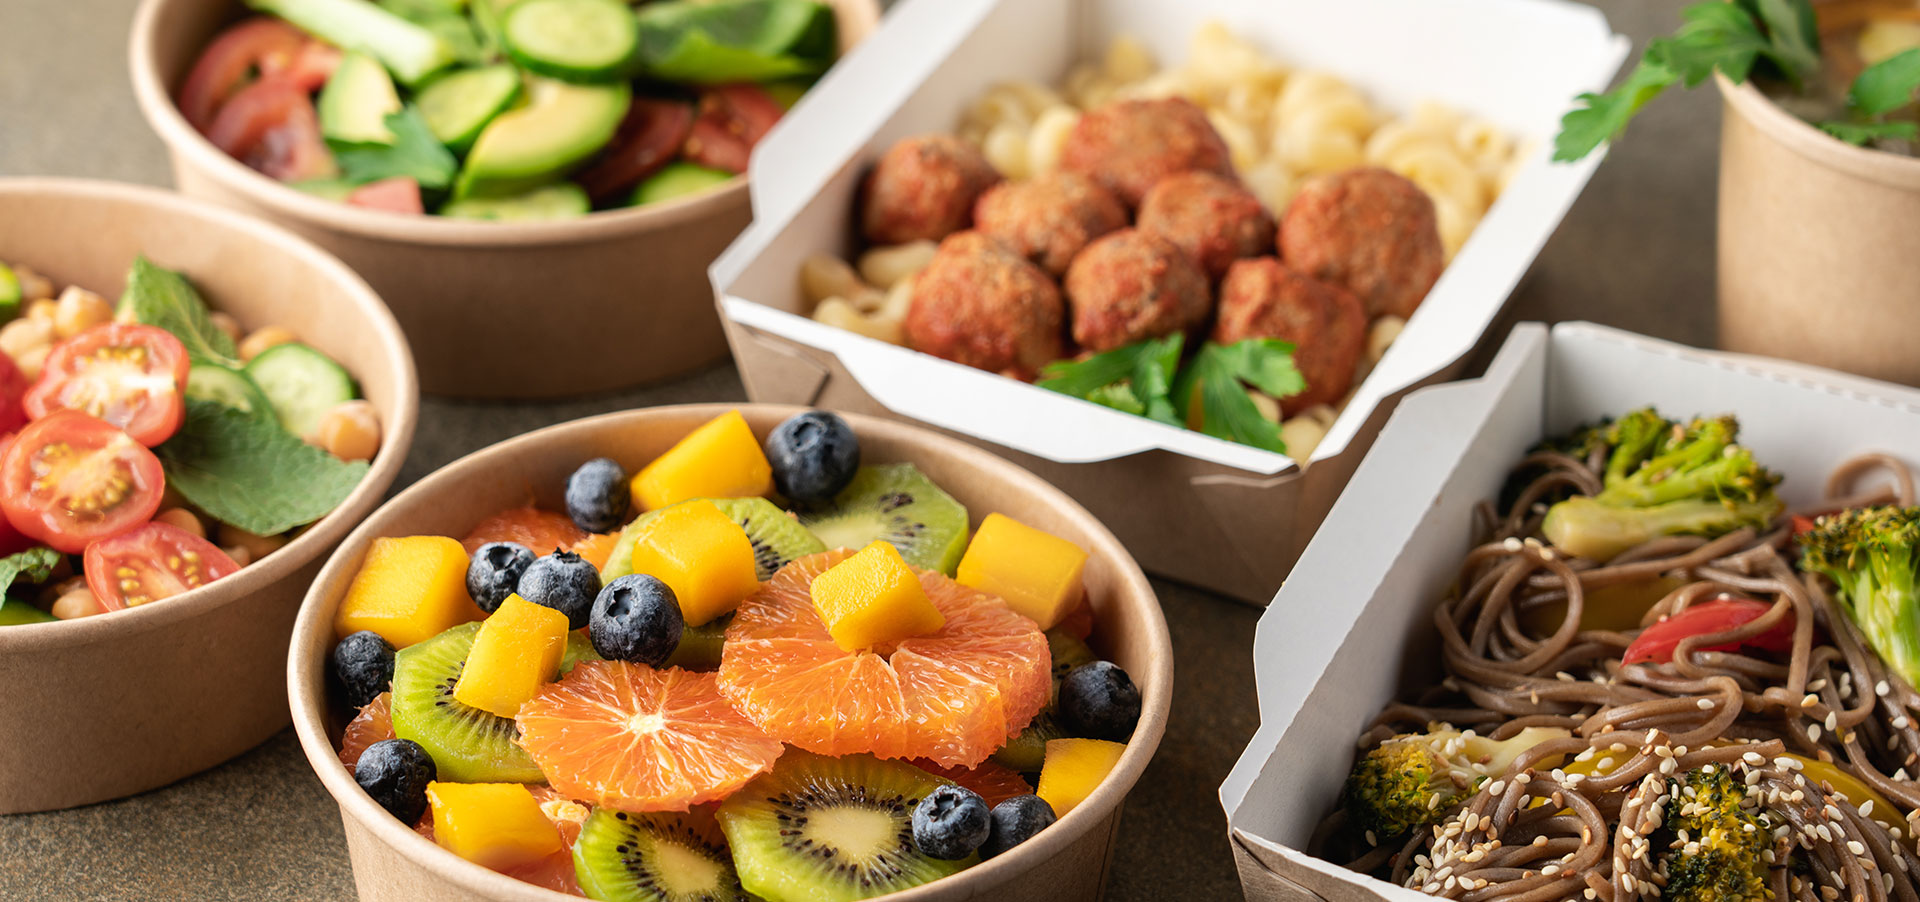 Recycled paper bowls and food containers hold green salads with tomatoes, cucumber, and avocado, a fruit salad with kiwi, mango, blueberries, and tangerine, a broccoli and noodle dish with sesame seeds, a meatball and macaroni dish with parsley